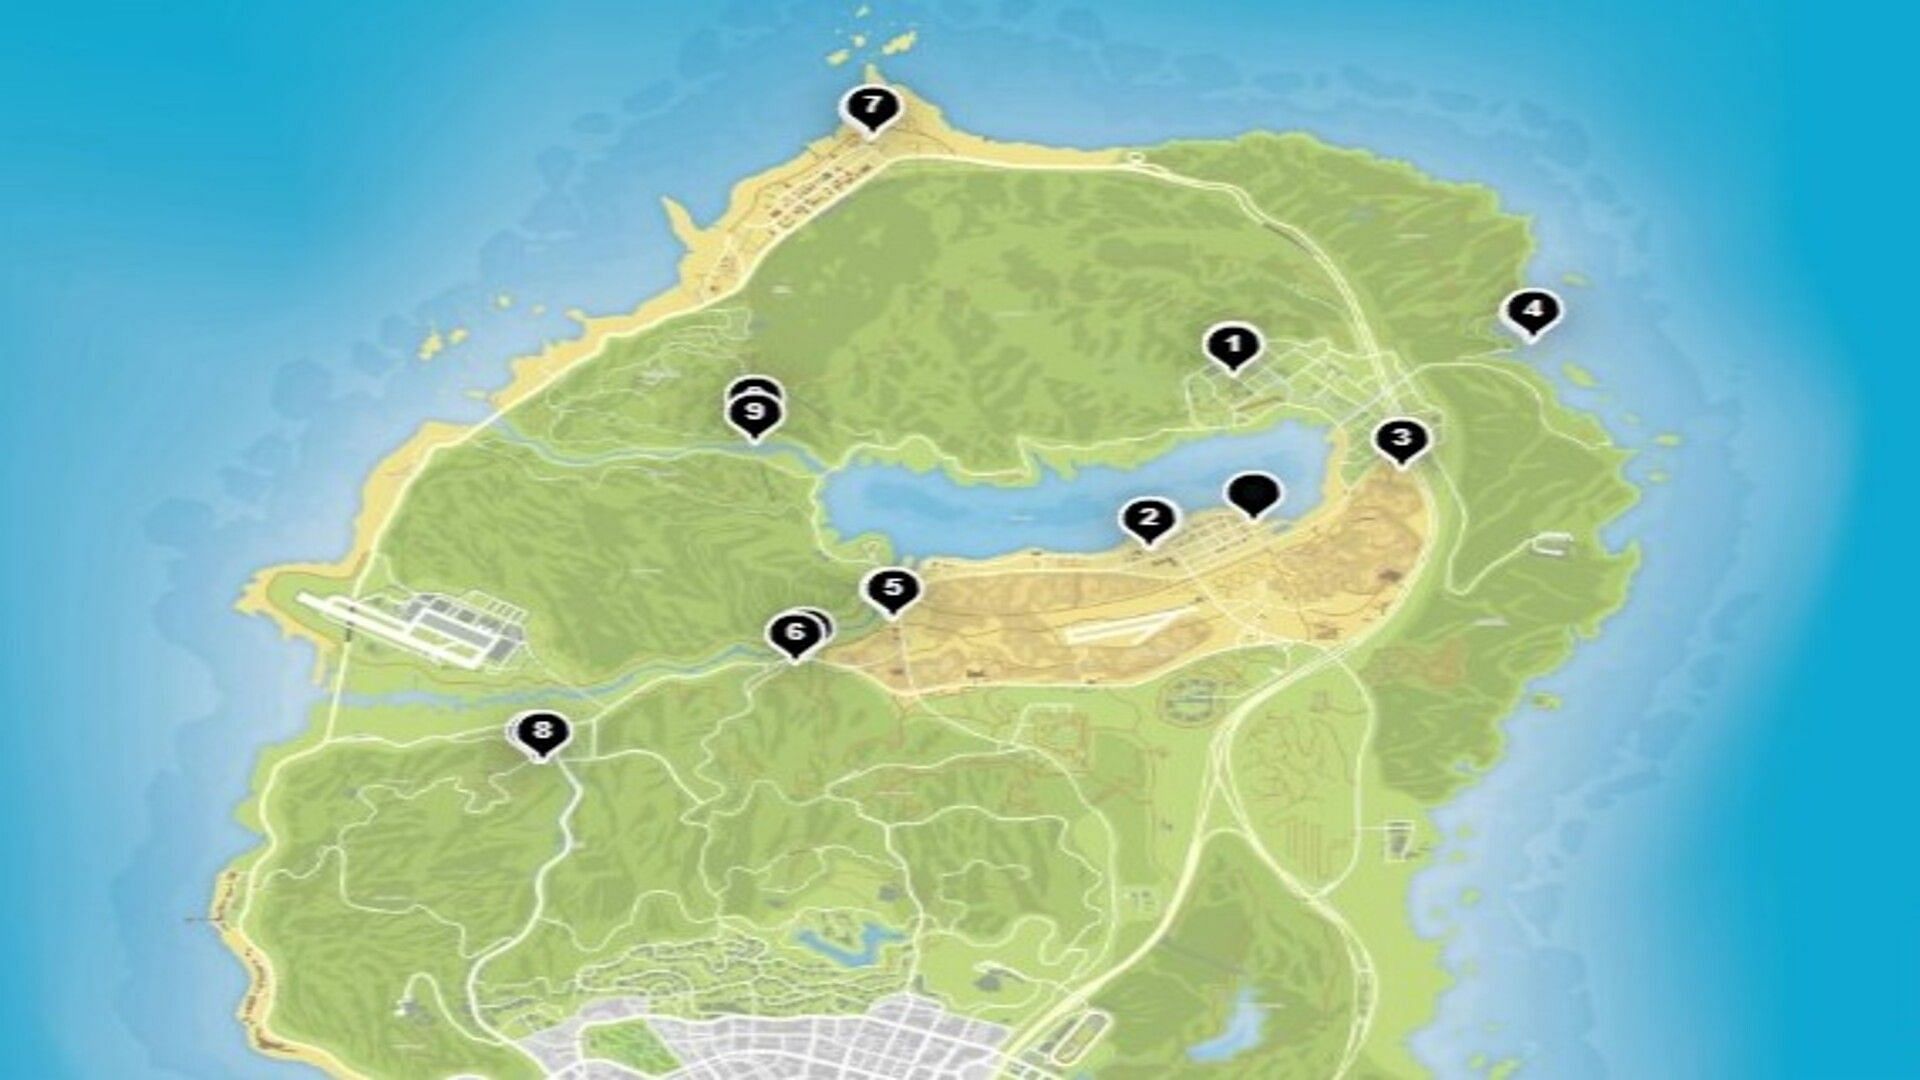 Location of all the ten ghosts that appear during the Ghosts Exposed event.